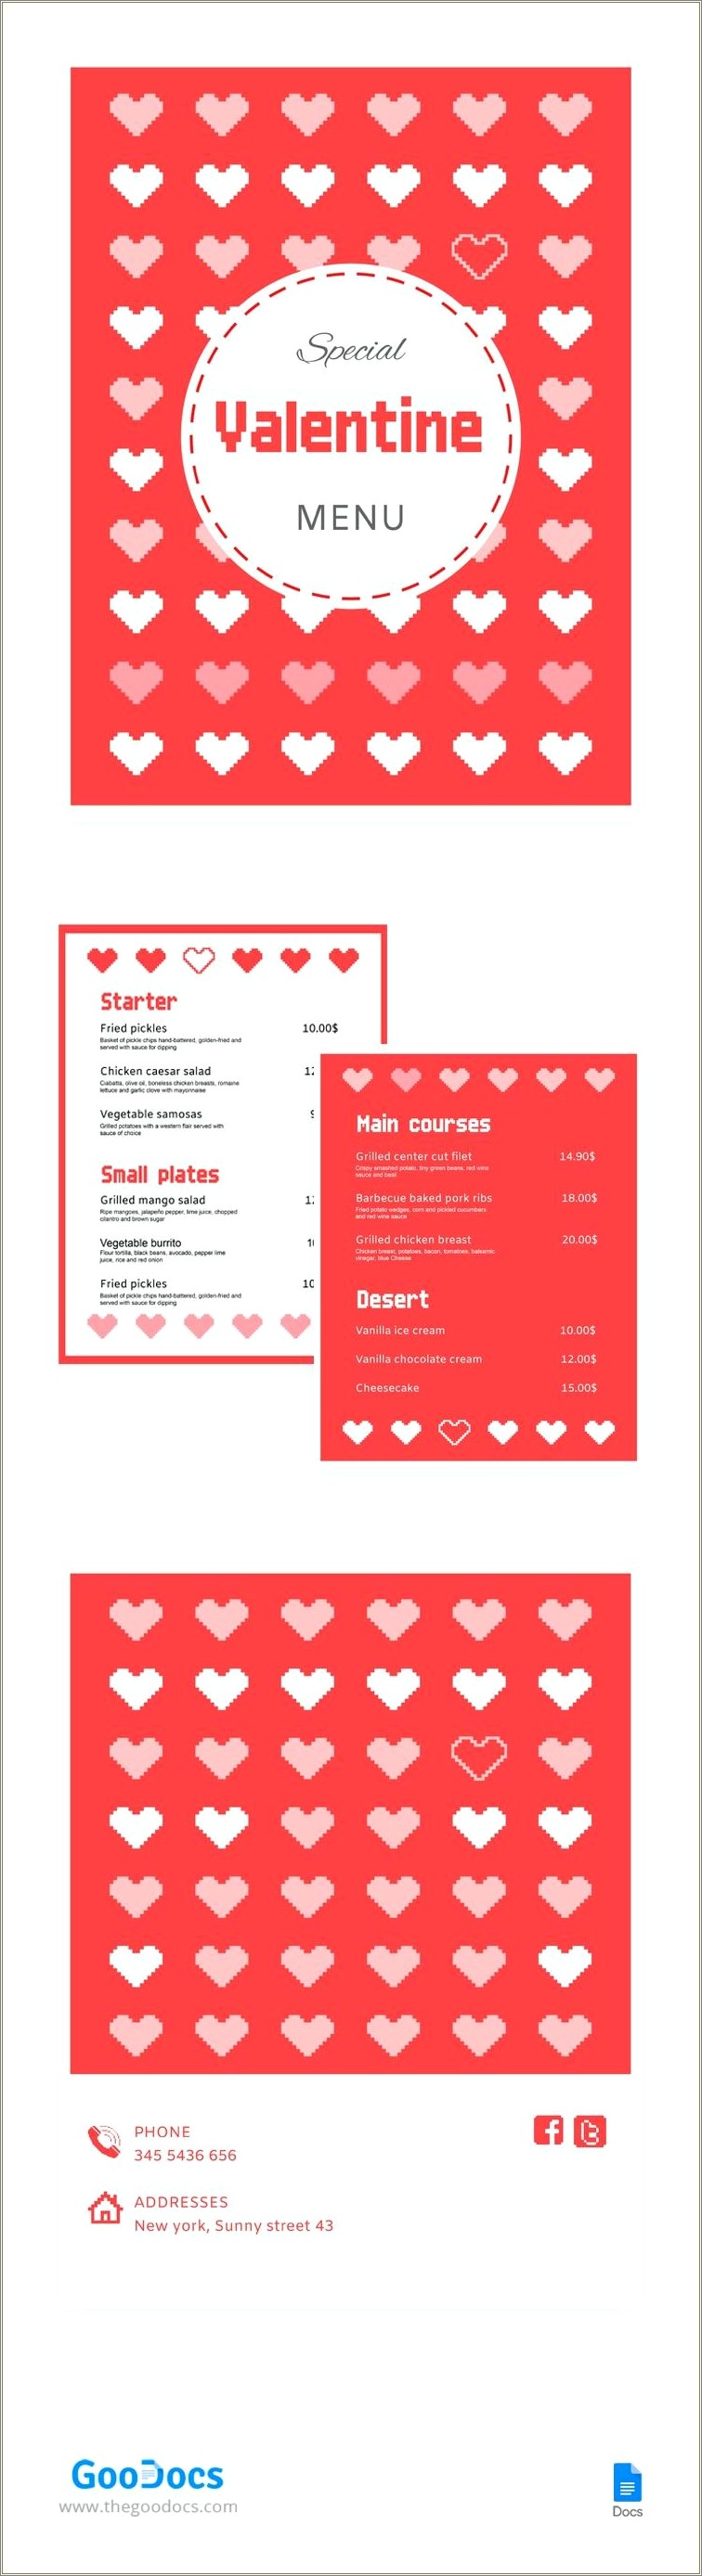 Free Google Docs Valentines Day Card Template